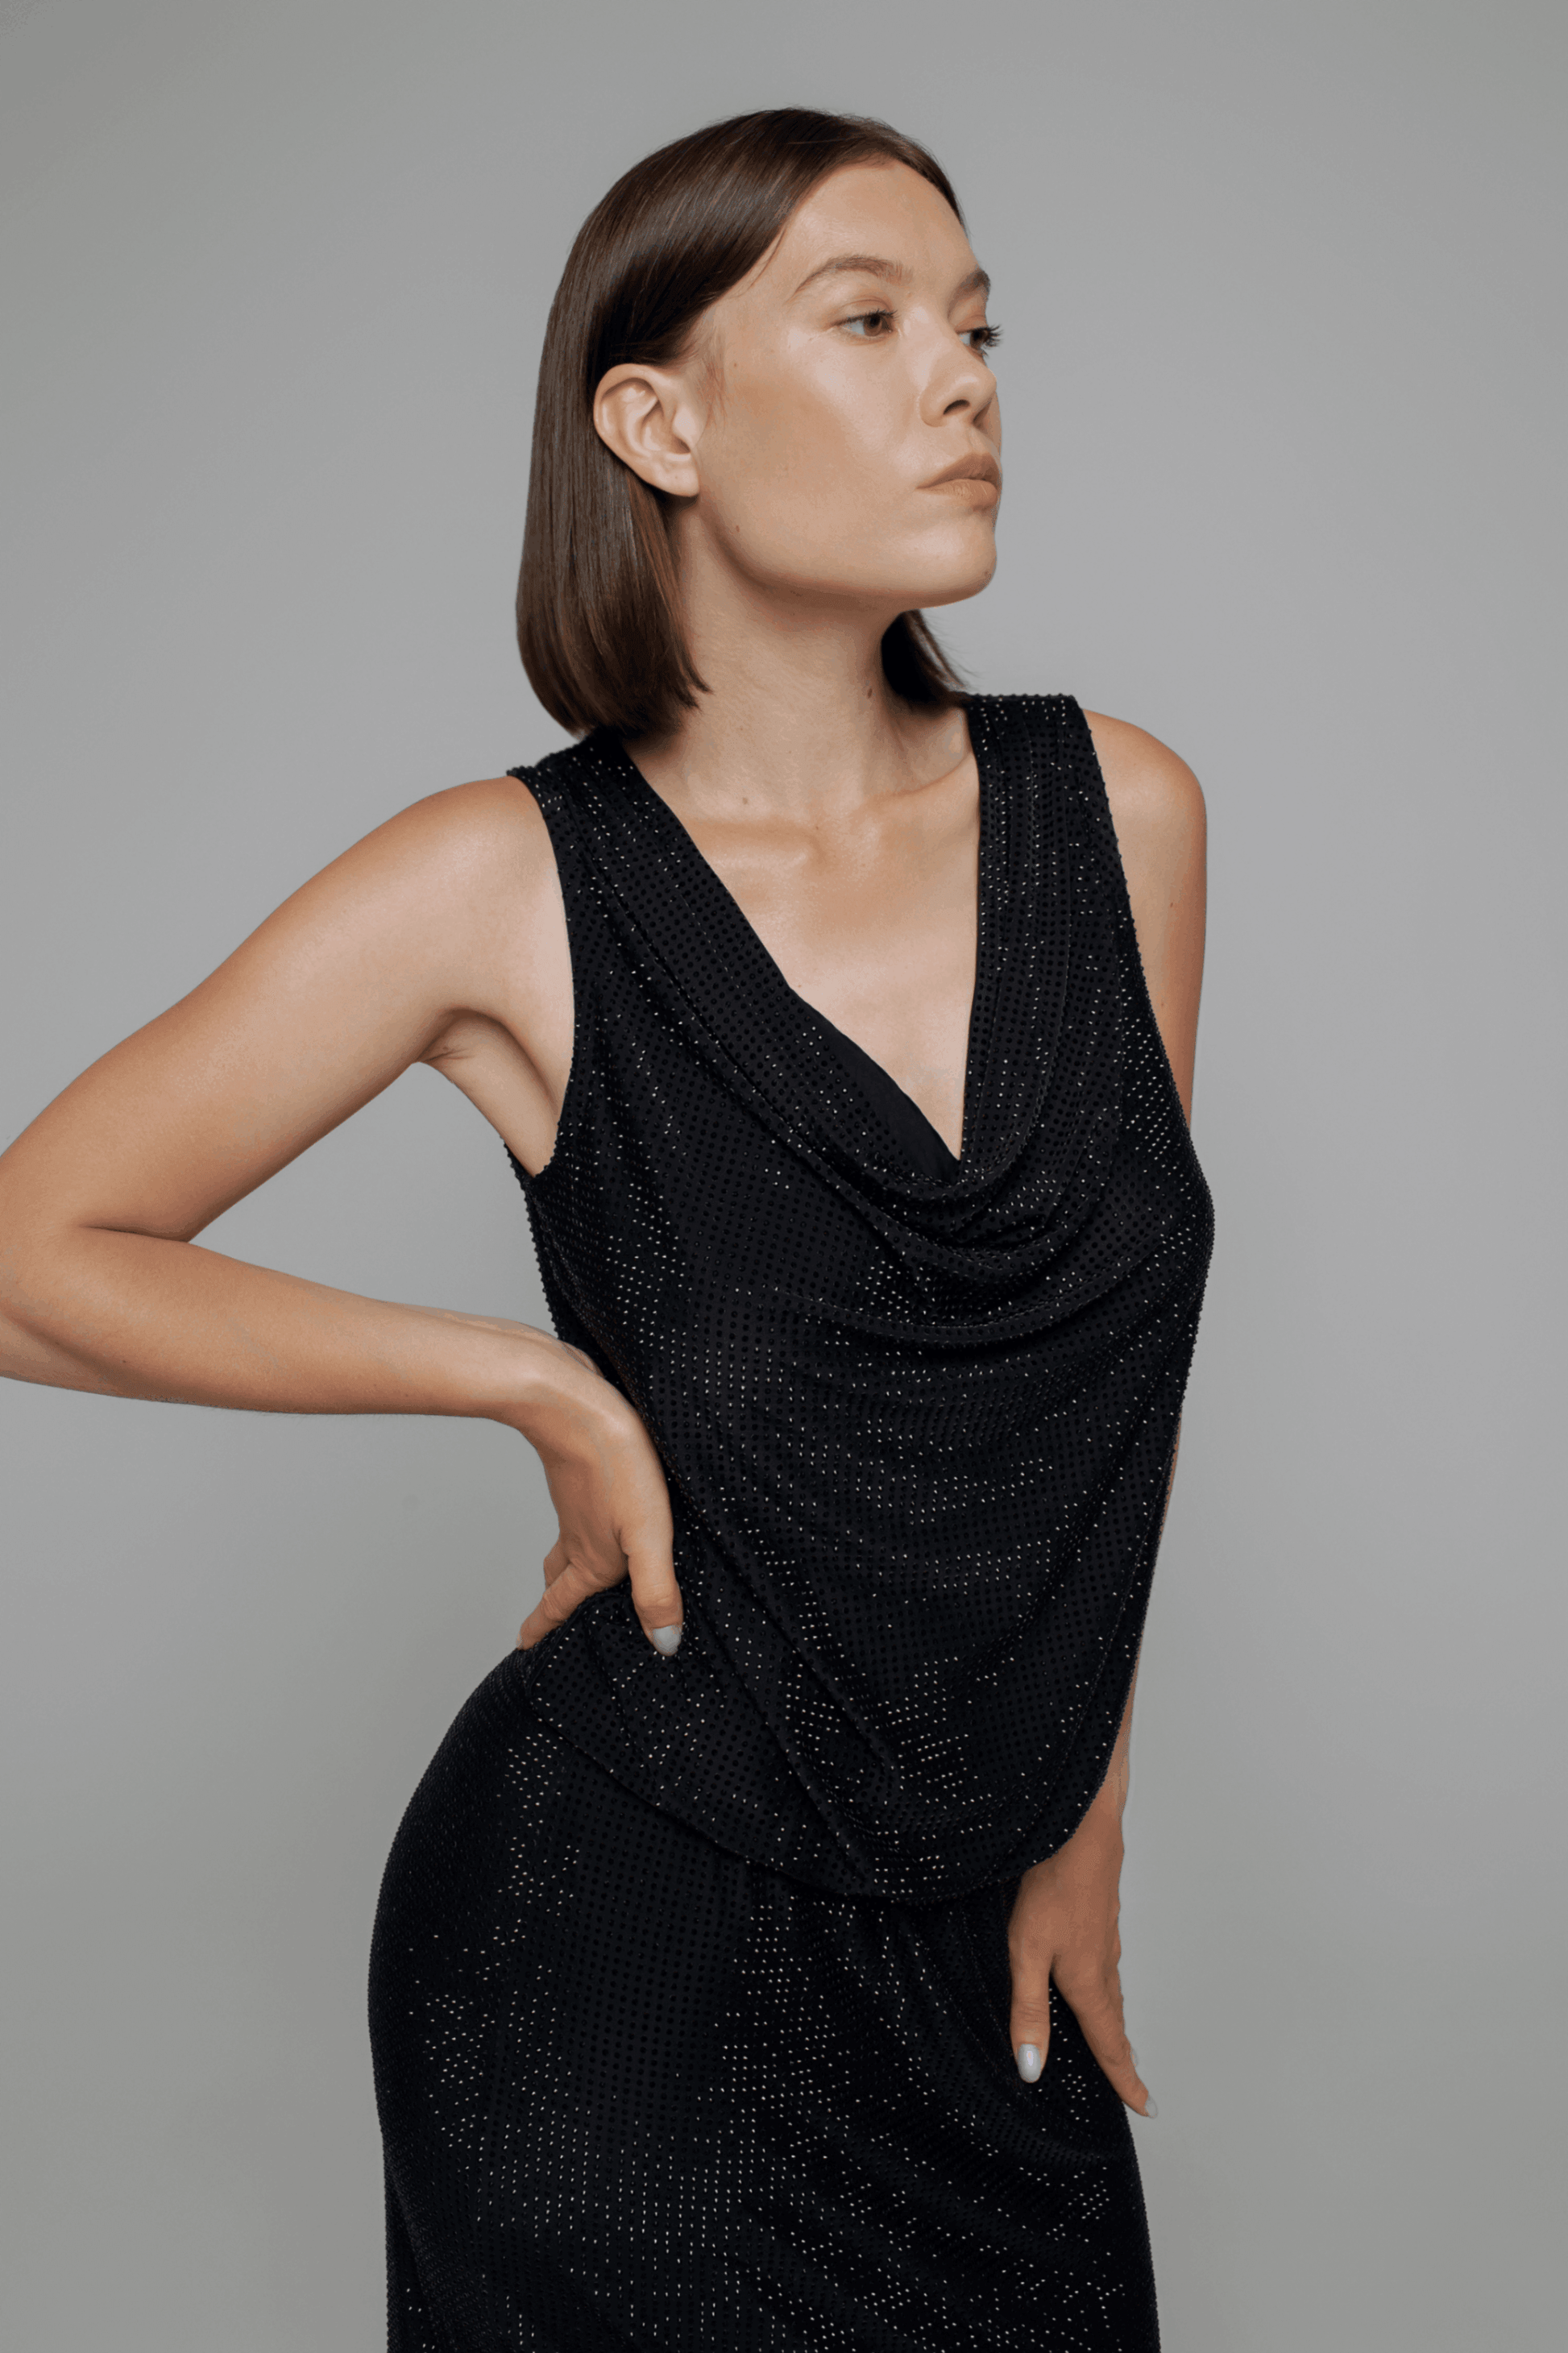 Exquisite detail of Axinia Crystal Cowlneck Sleeveless Top showcasing the fine craftsmanship and elegant design characteristic of Axinia Collection 's luxury collection.